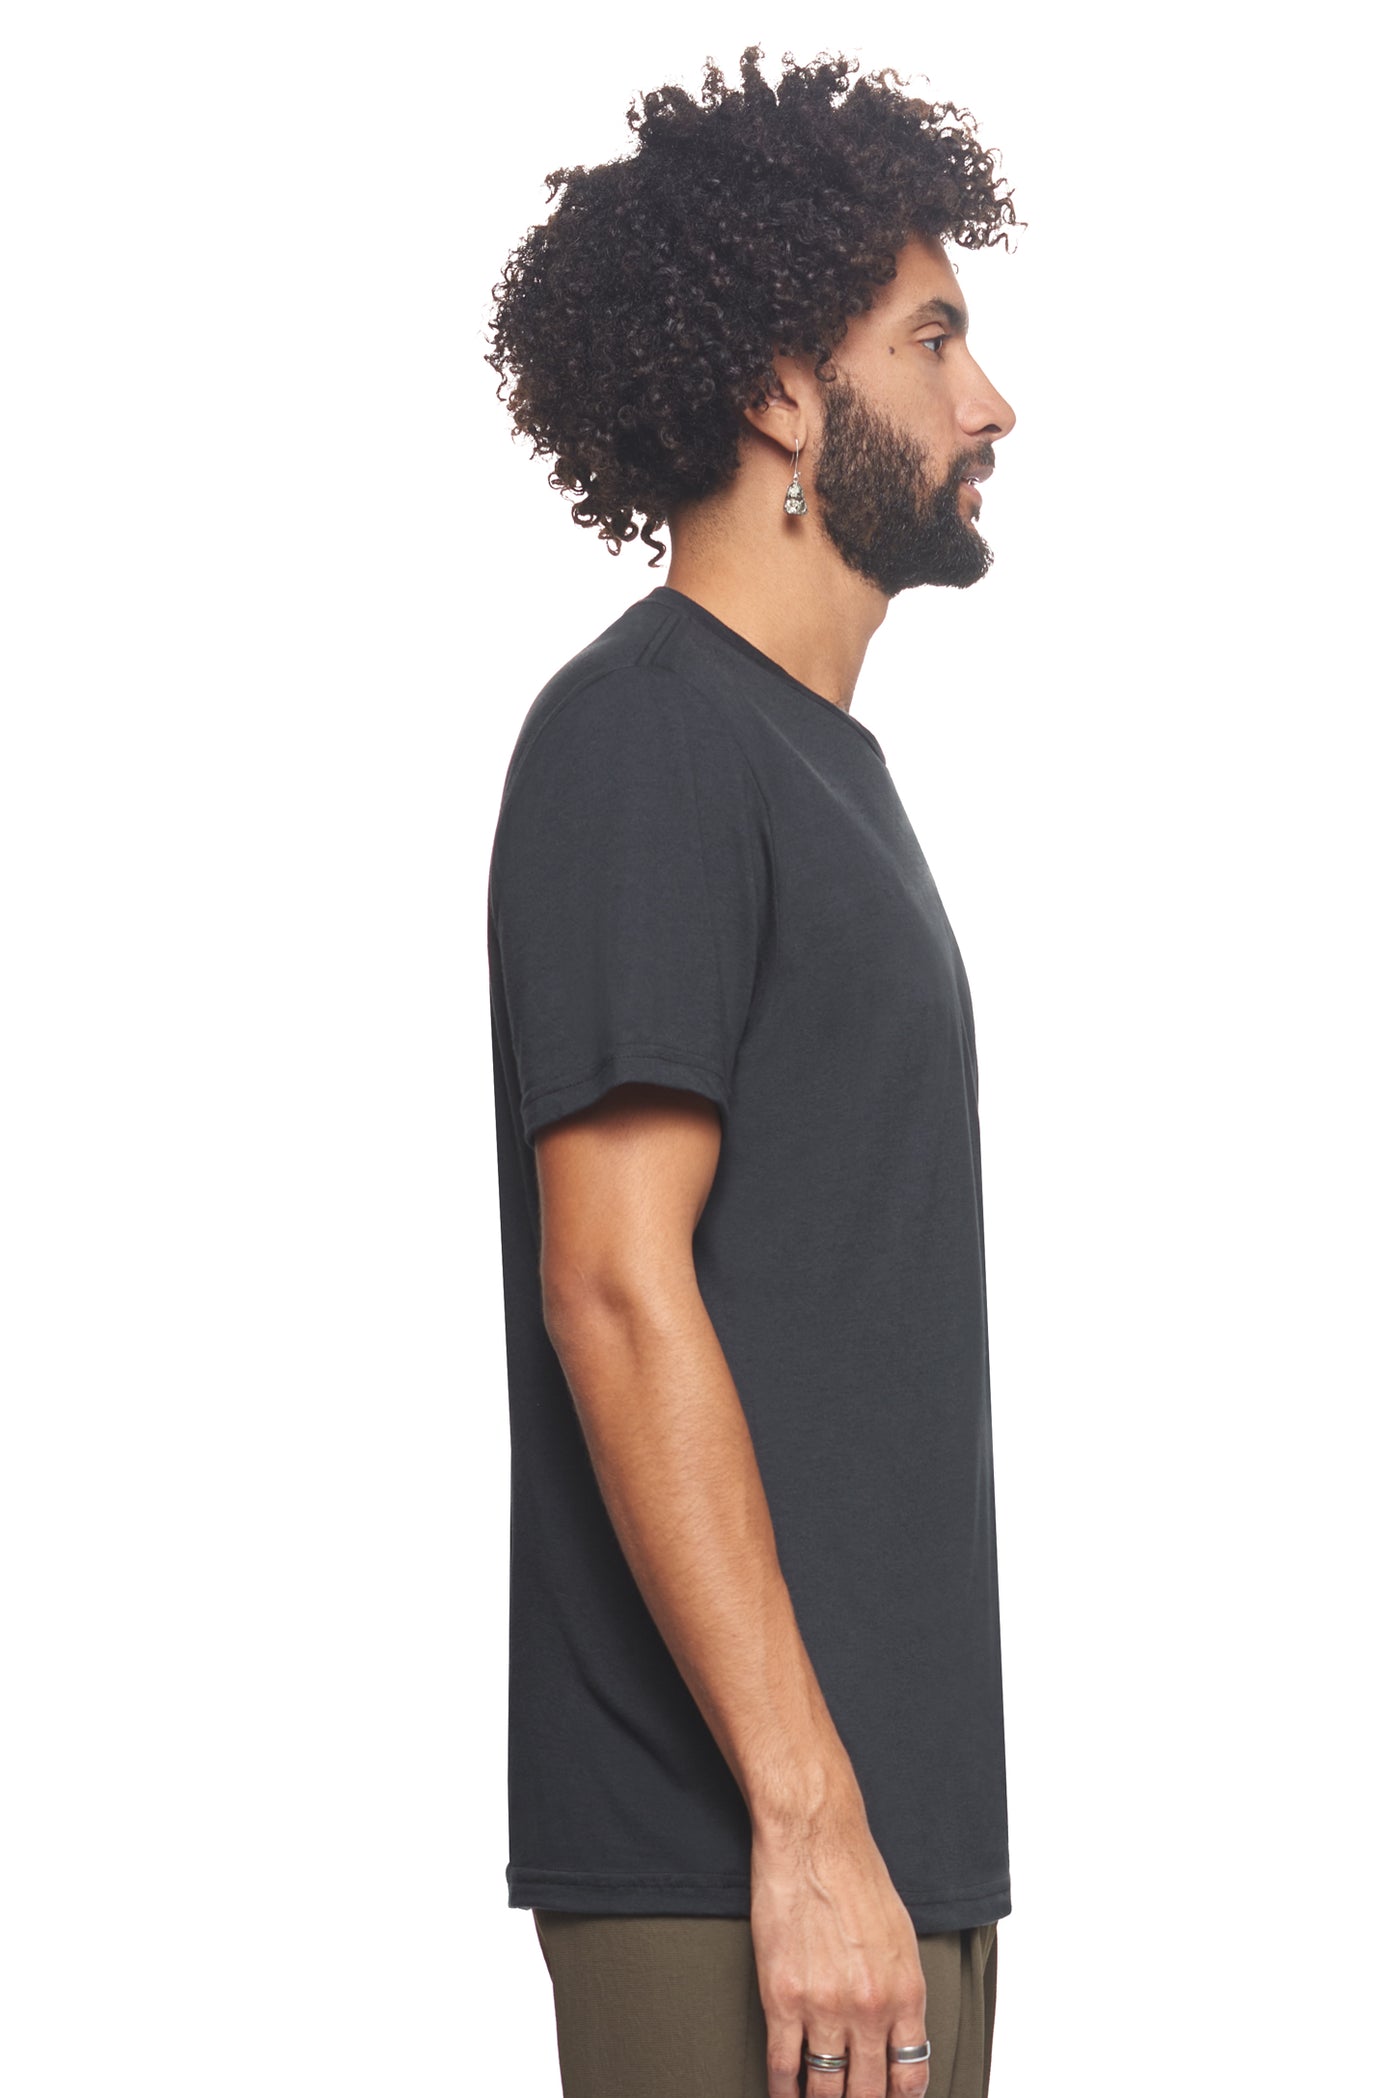 Expert Brand Retail Sustainable Eco-Friendly Hemp Organic Cotton Men's crewneck T-Shirt Made in the USA 2#color_black